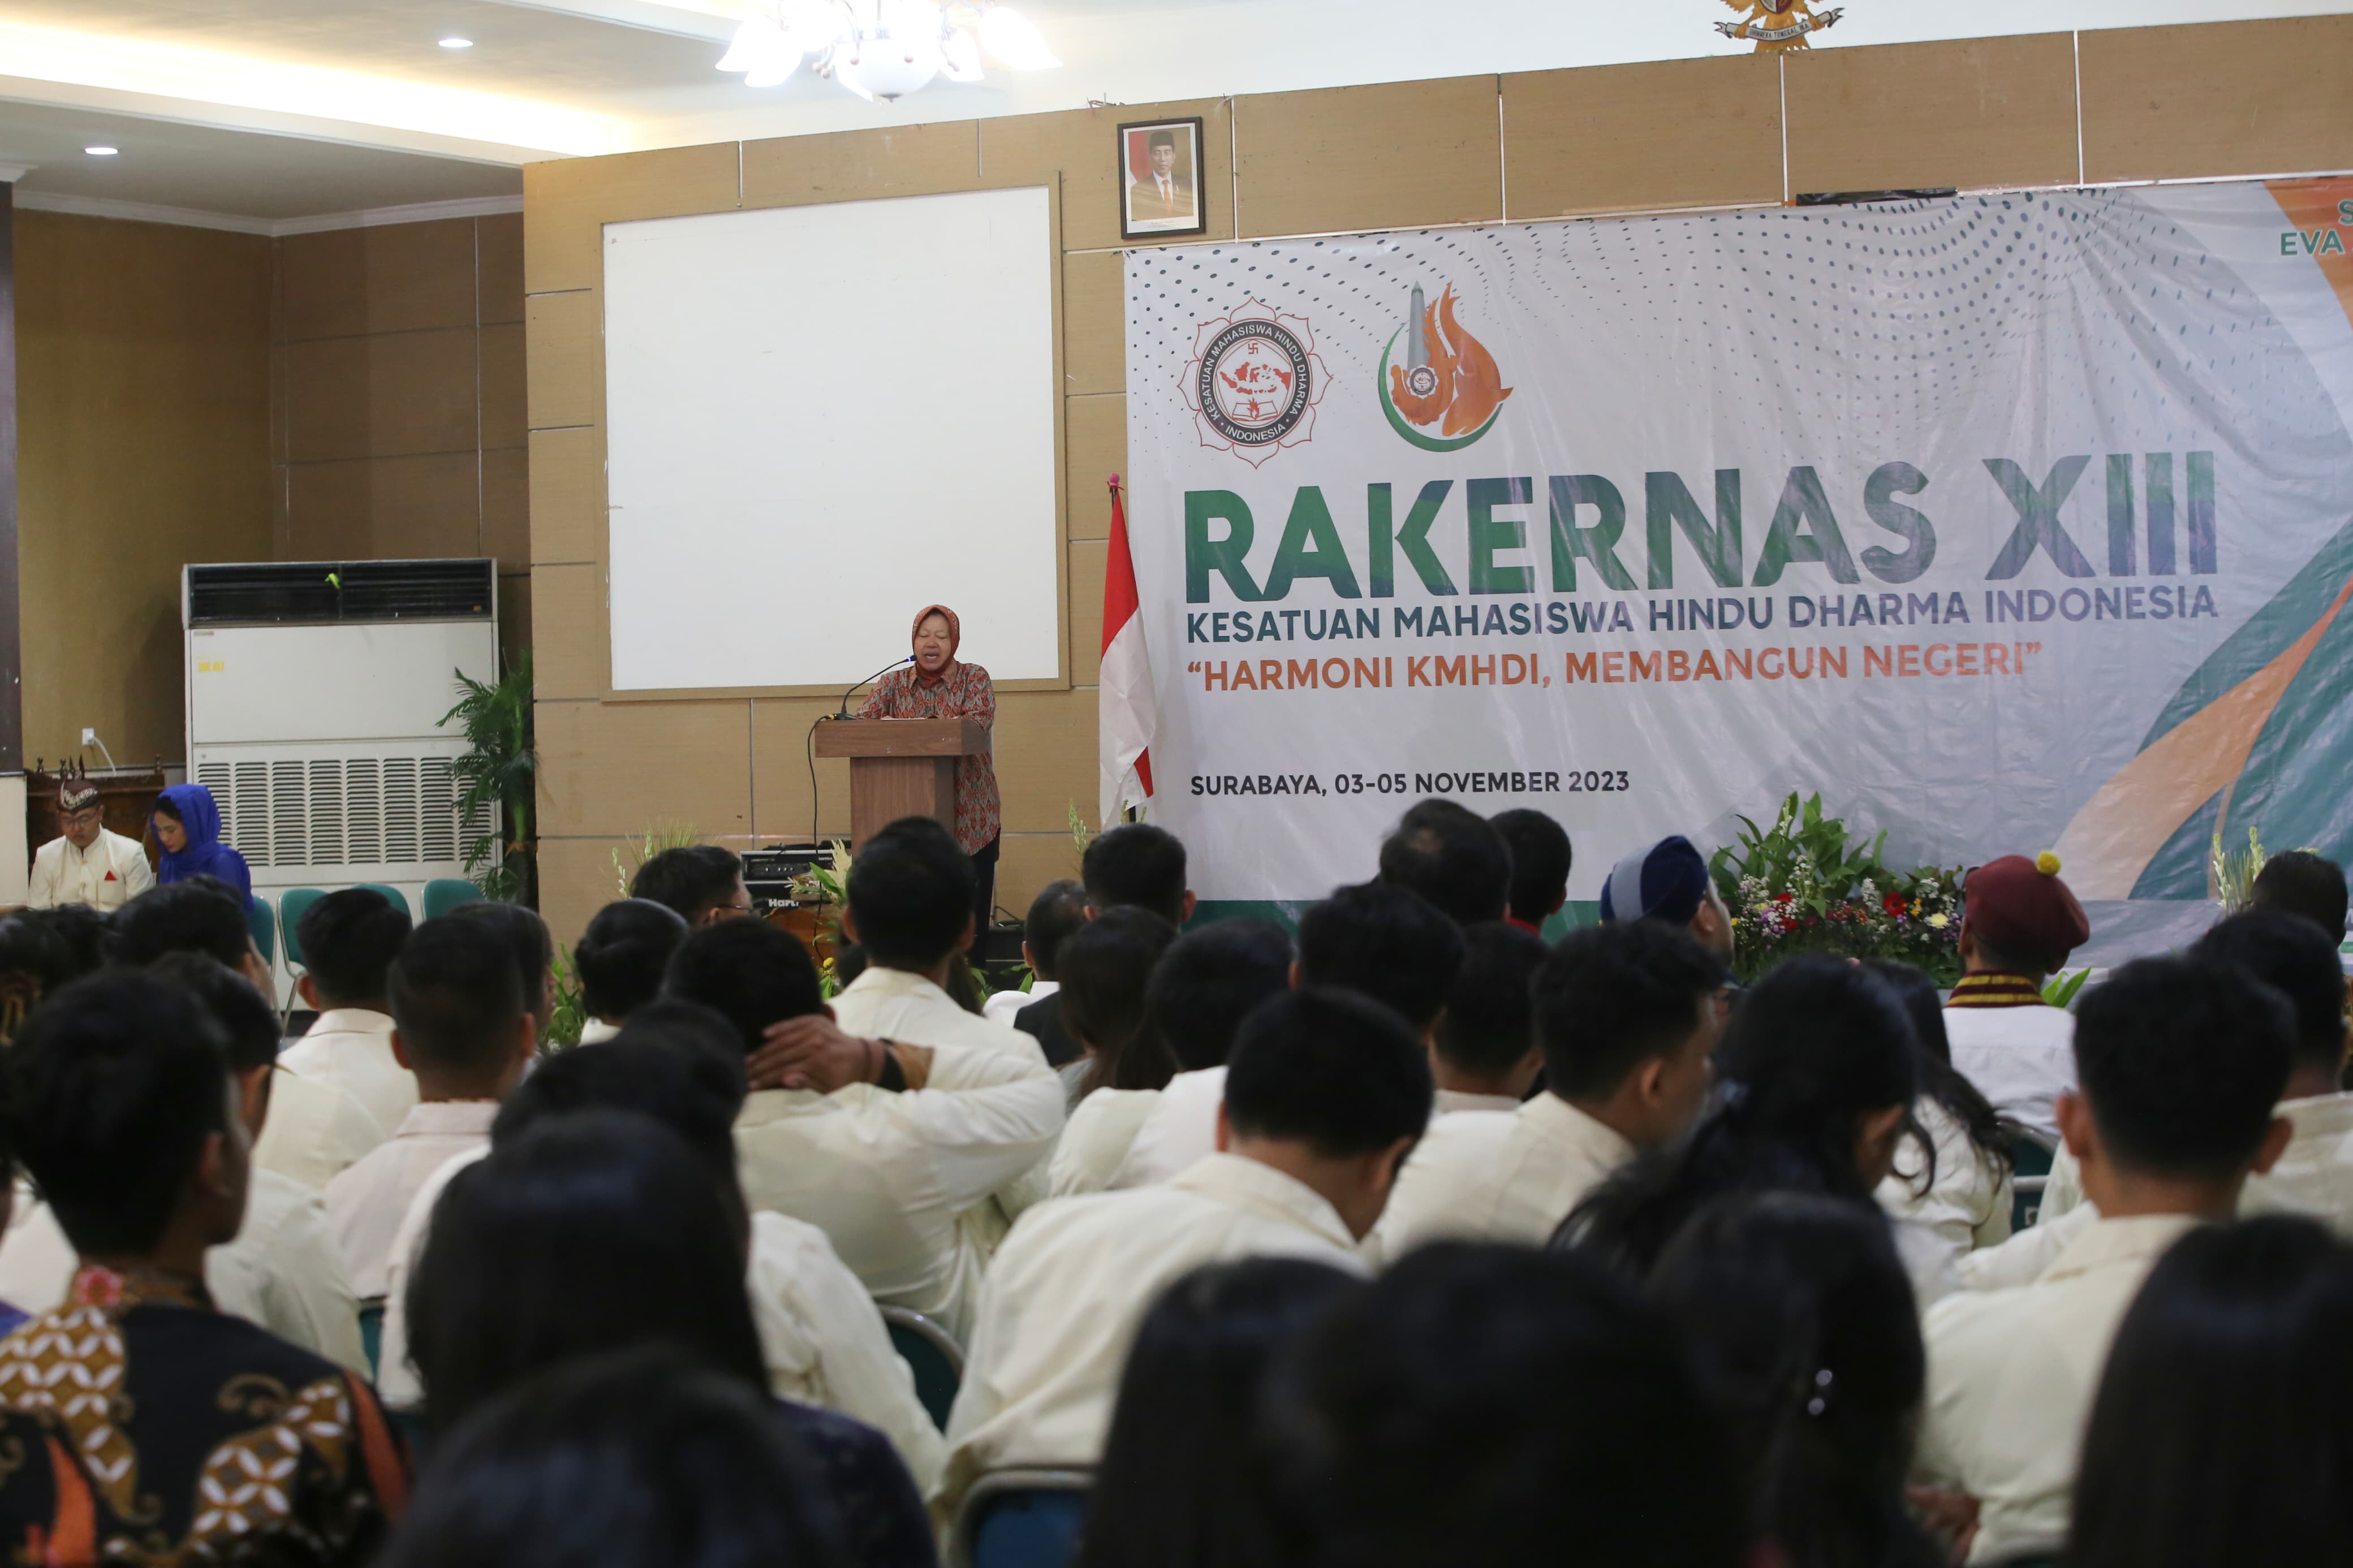 Minister of Social Affairs Invites Students to Build Regions